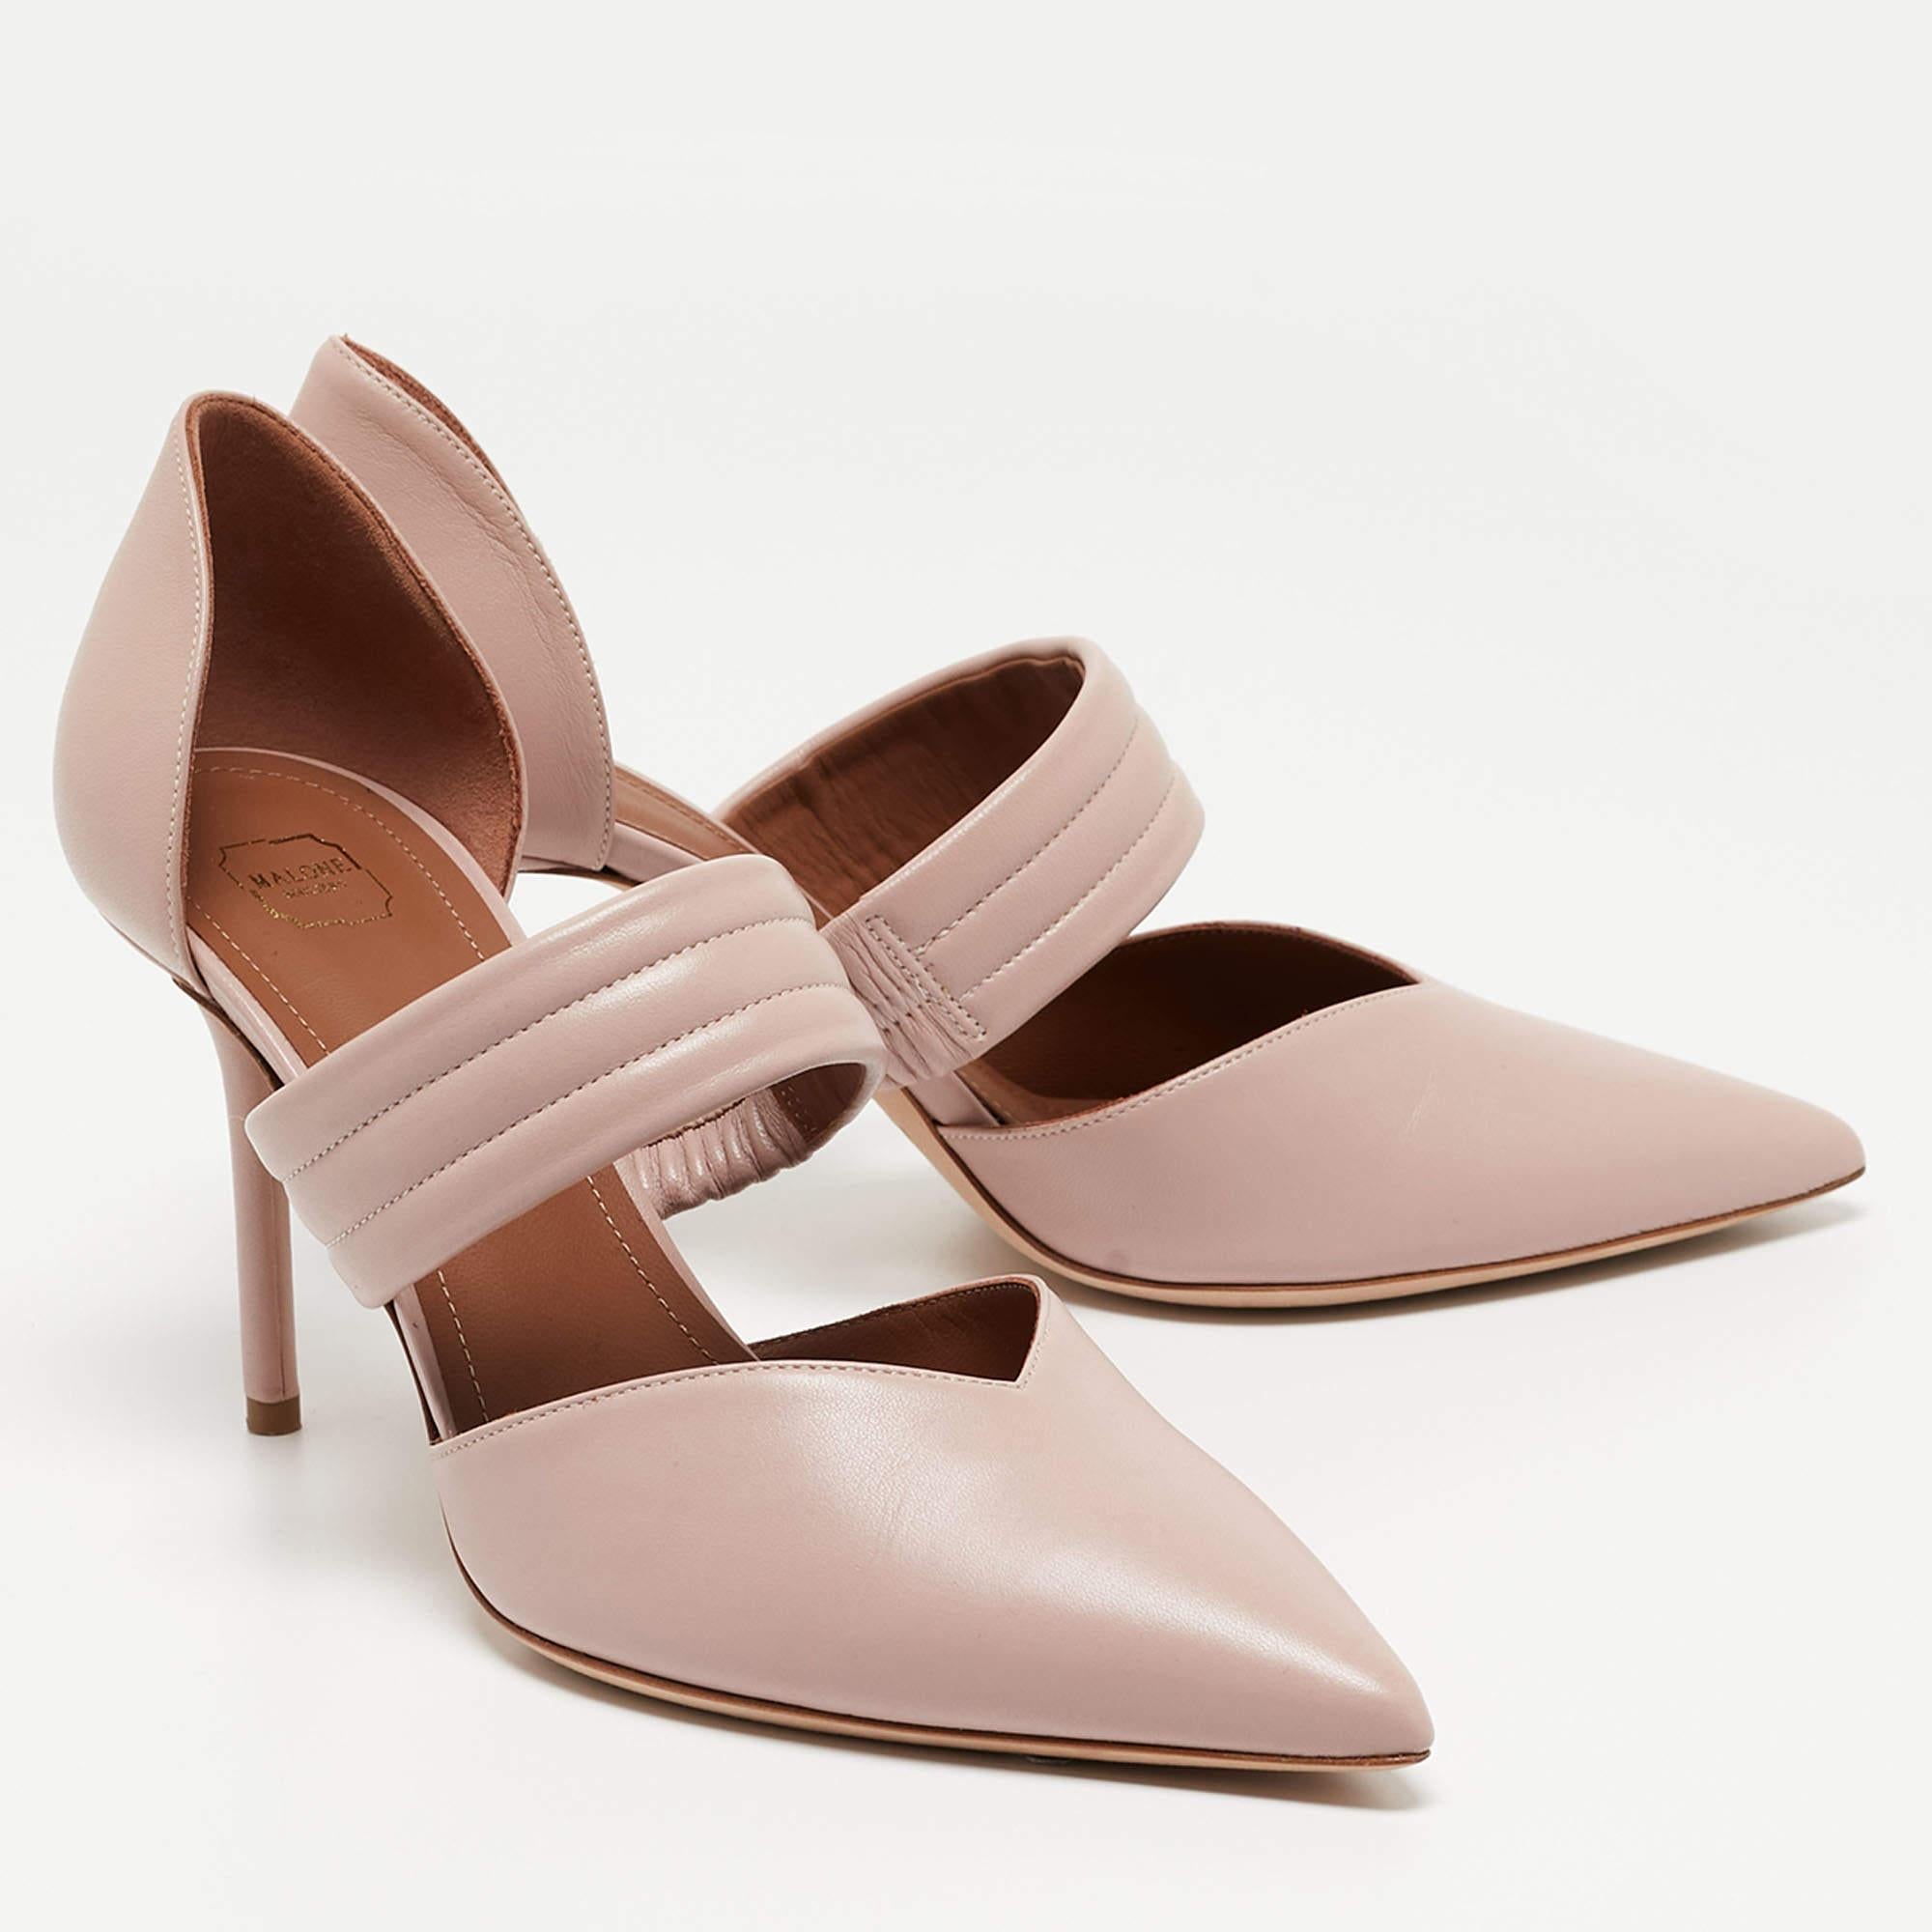 Malone Souliers Pink Leather Mida Pumps Size 40 In Excellent Condition For Sale In Dubai, Al Qouz 2